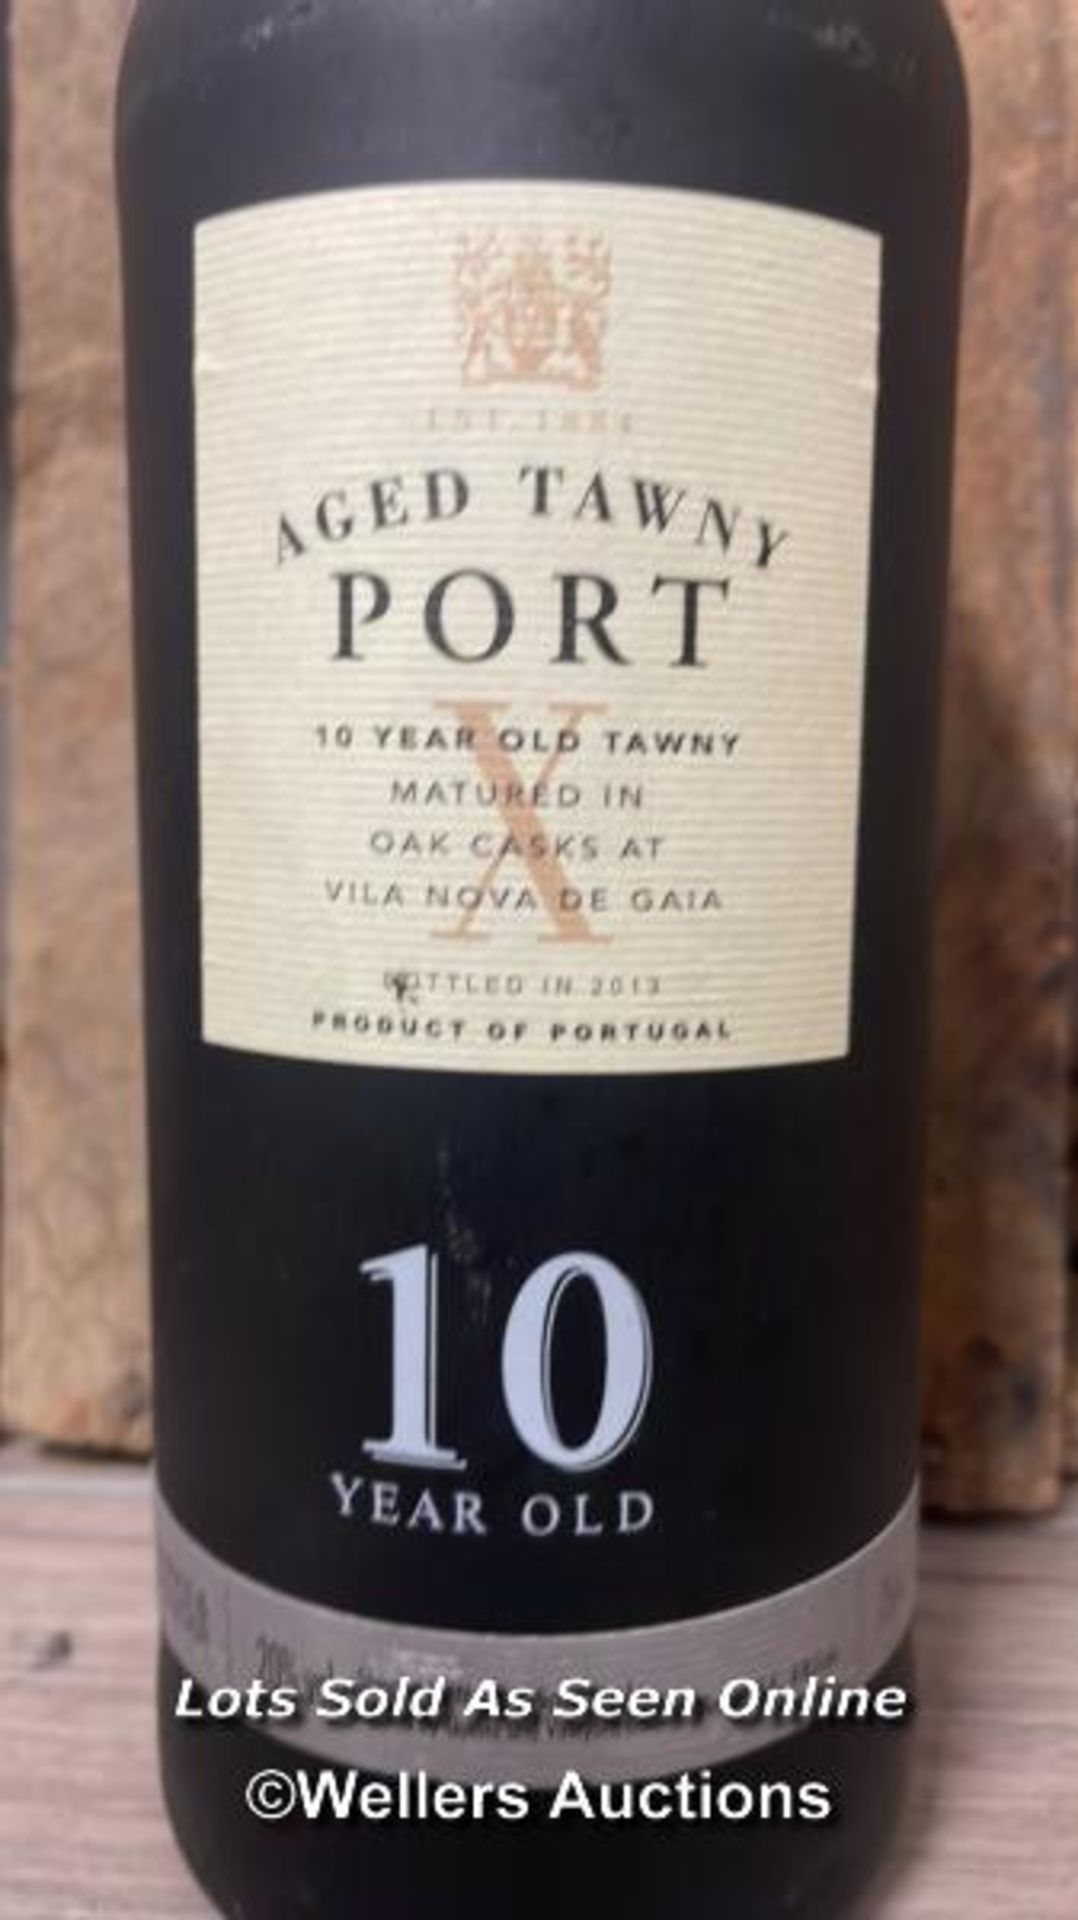 M&S AGED TAWNY PORT, 10 YEARS, BOTTLED IN 2013, 20% VOL, 75CL - Image 2 of 4